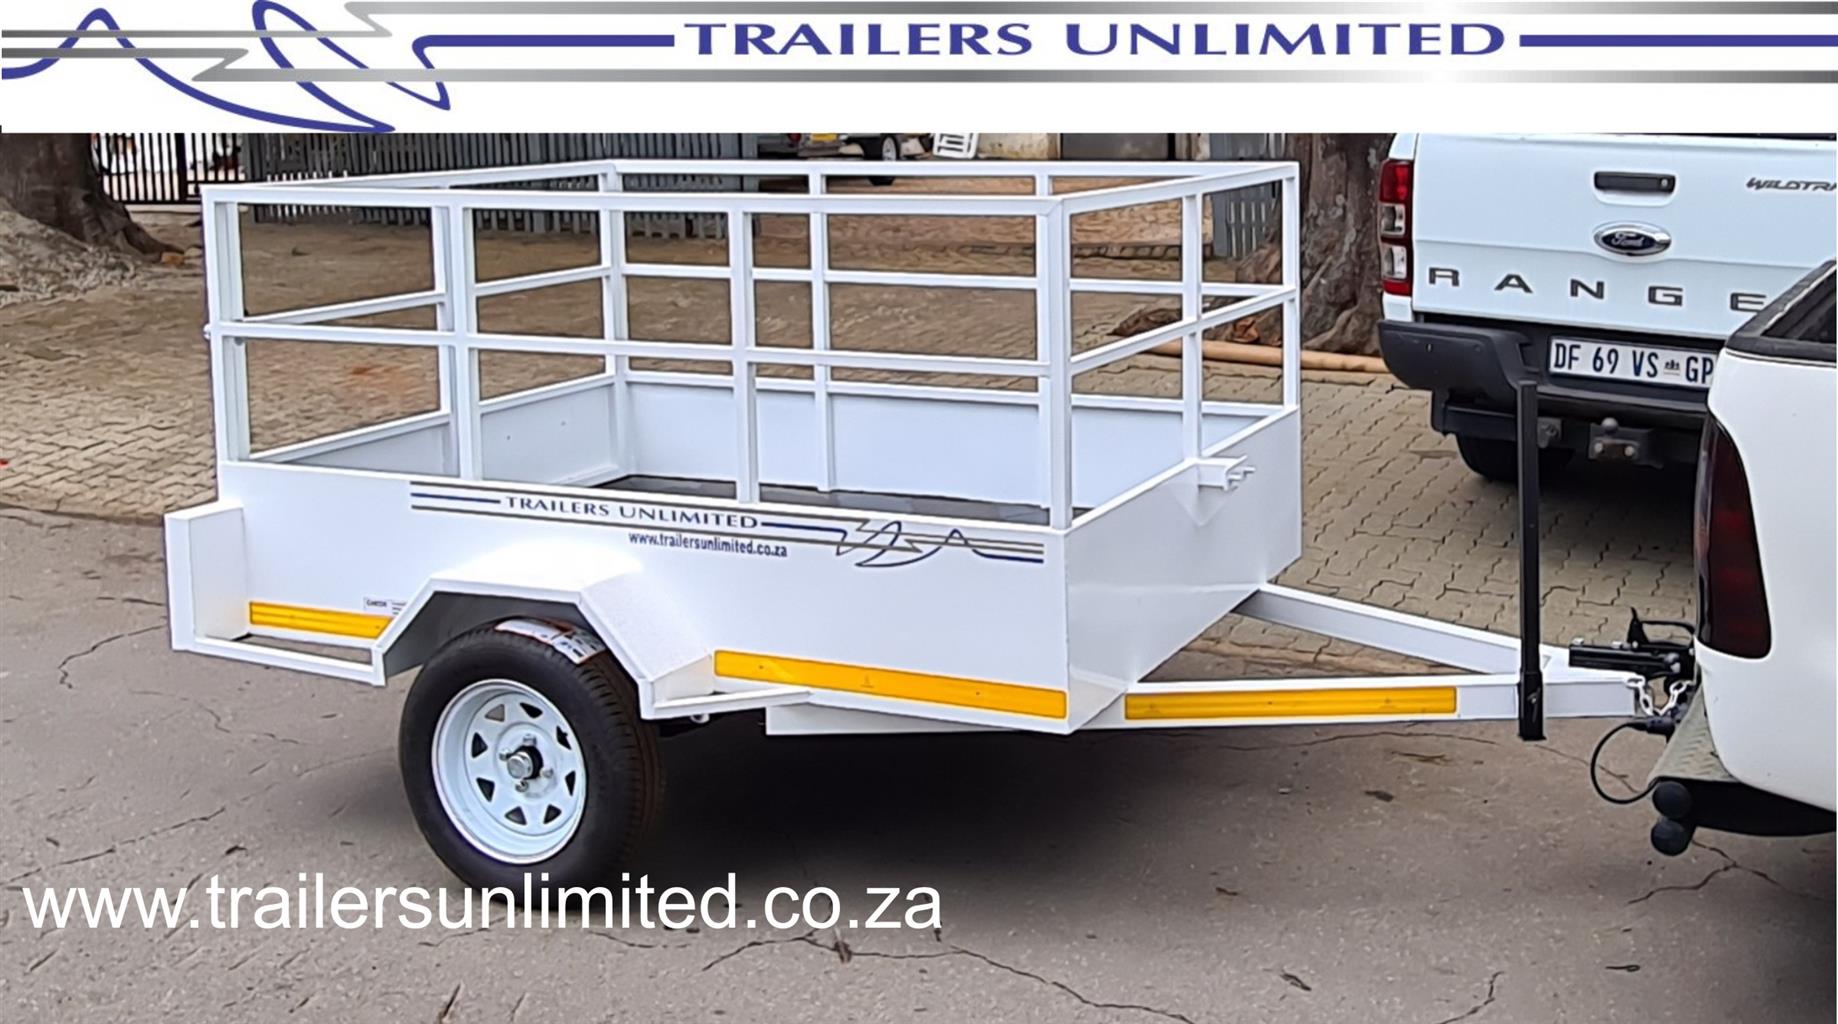 TRAILERS UNLIMITED UTILITY TRAILER